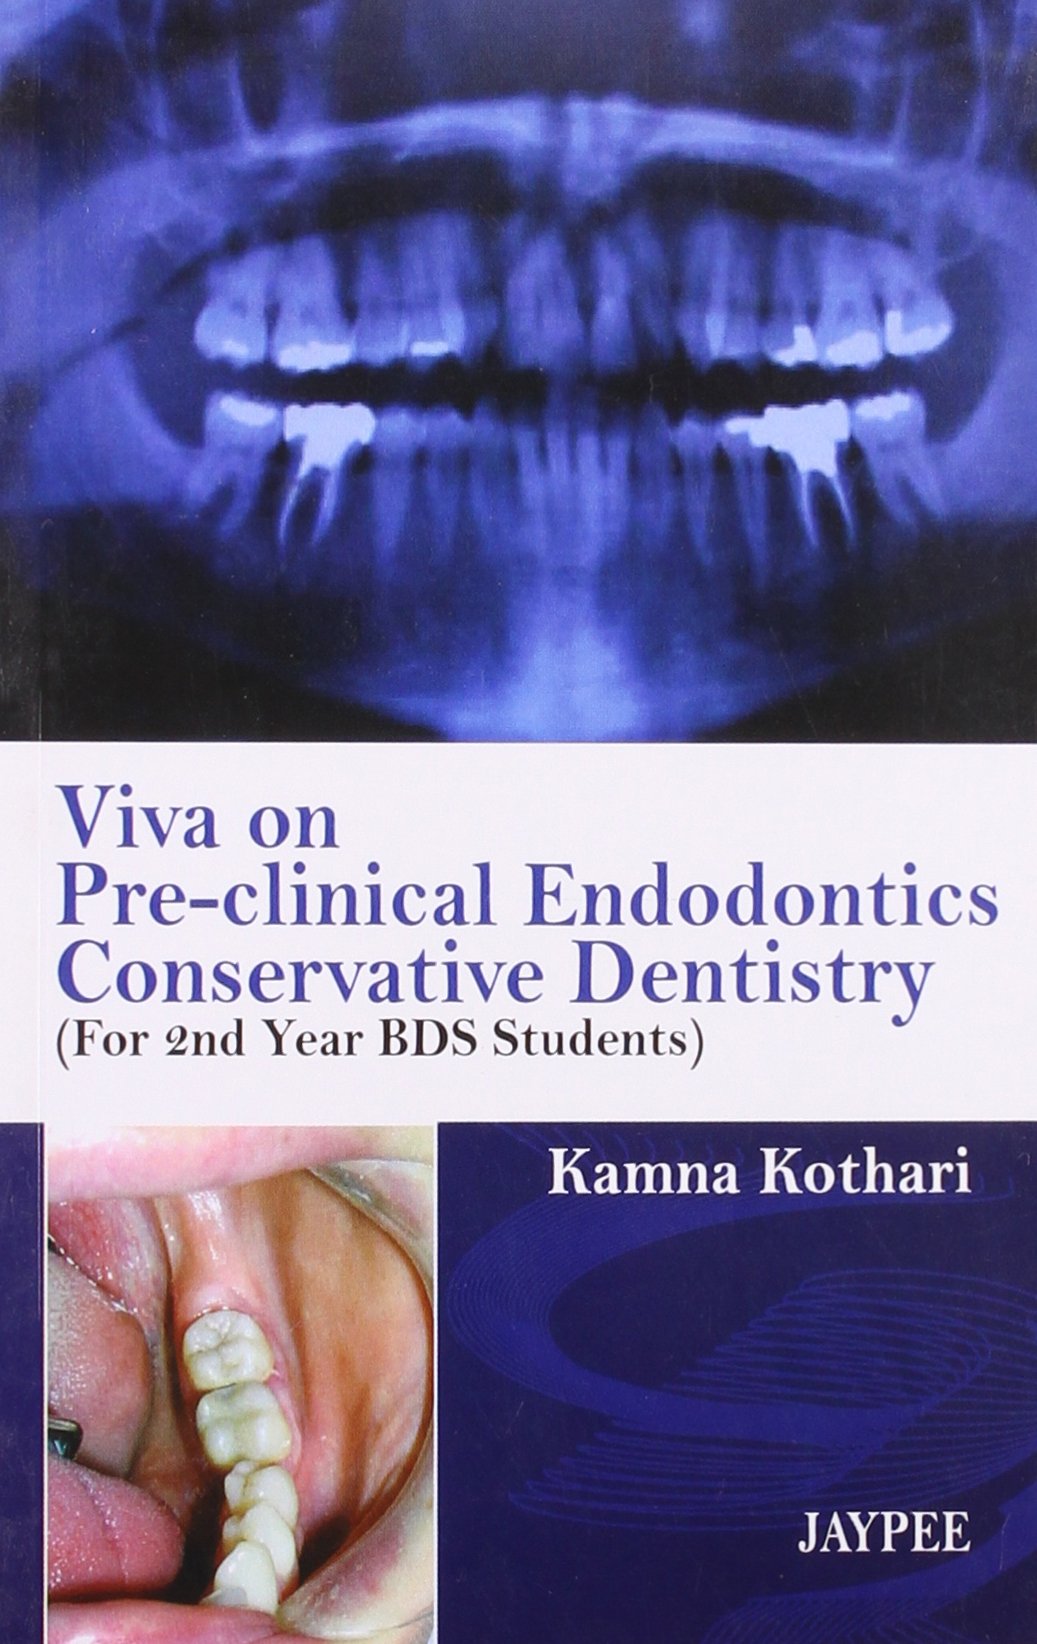 viva-on-pre-clinical-endodontics-conservative-dentistryfor-2nd-year-bds-students